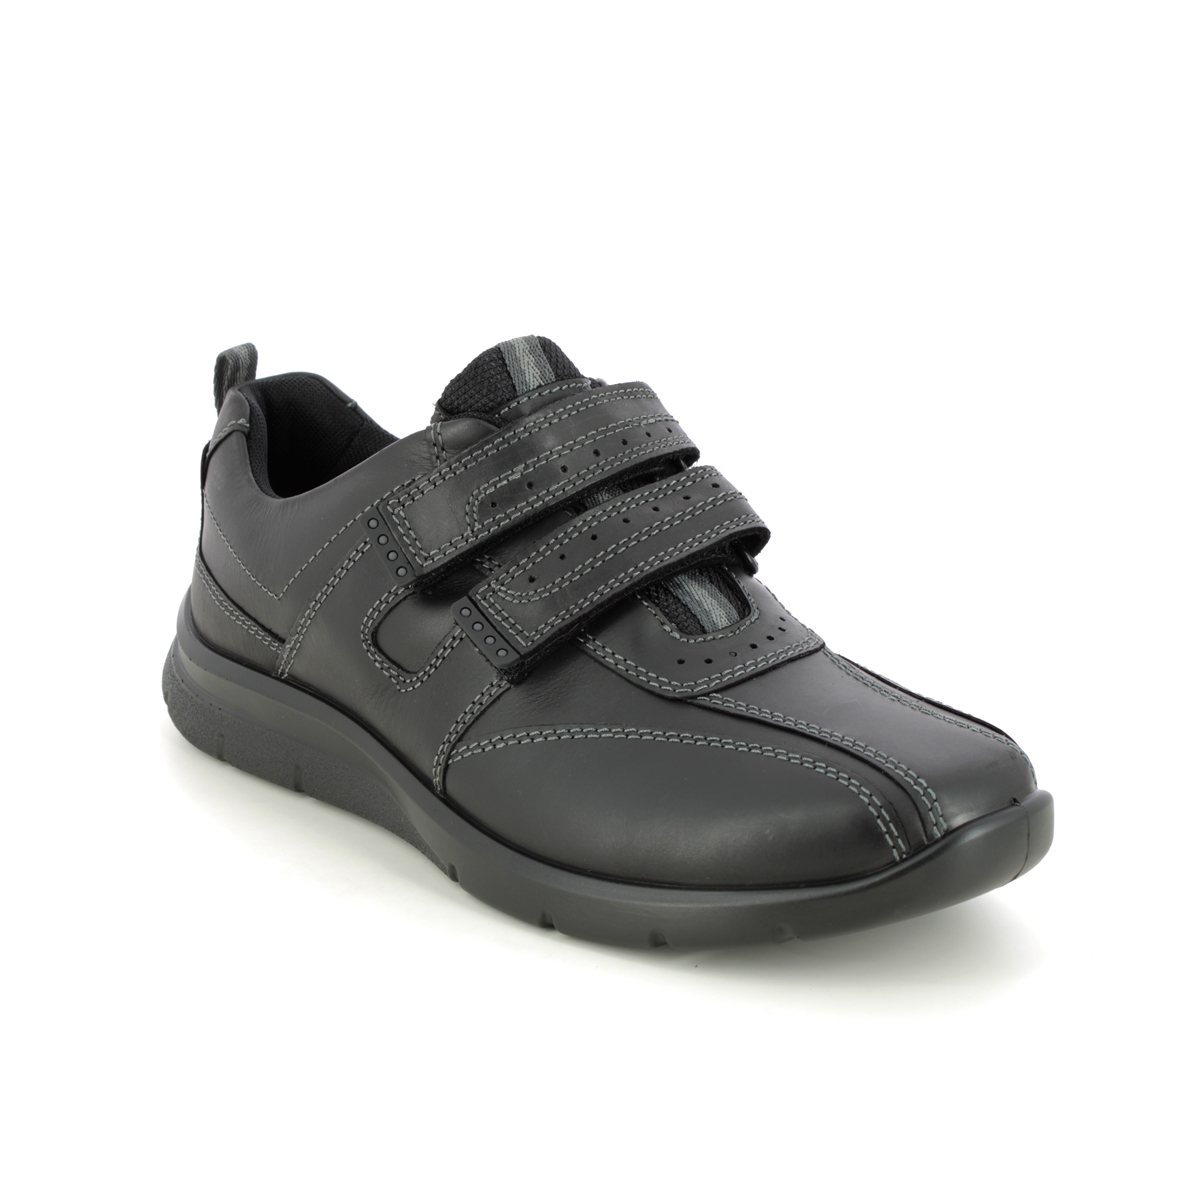 Hotter Energise 2v Black leather Mens Riptape Shoes 3081-31 in a Plain Leather in Size 11